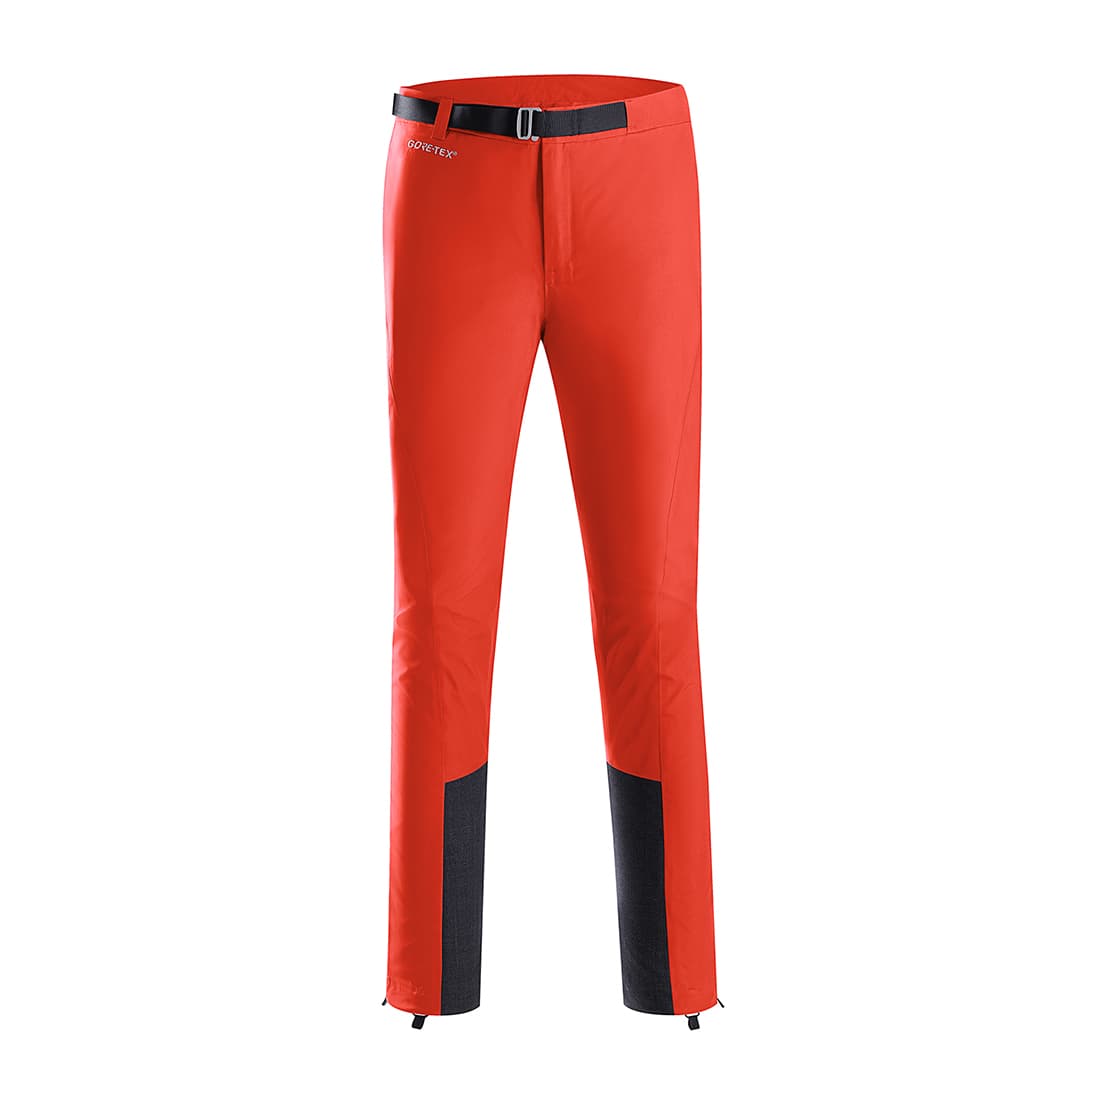 kailas Mont 2.0 Hardshell Pants Women Flame red KG140079 12035